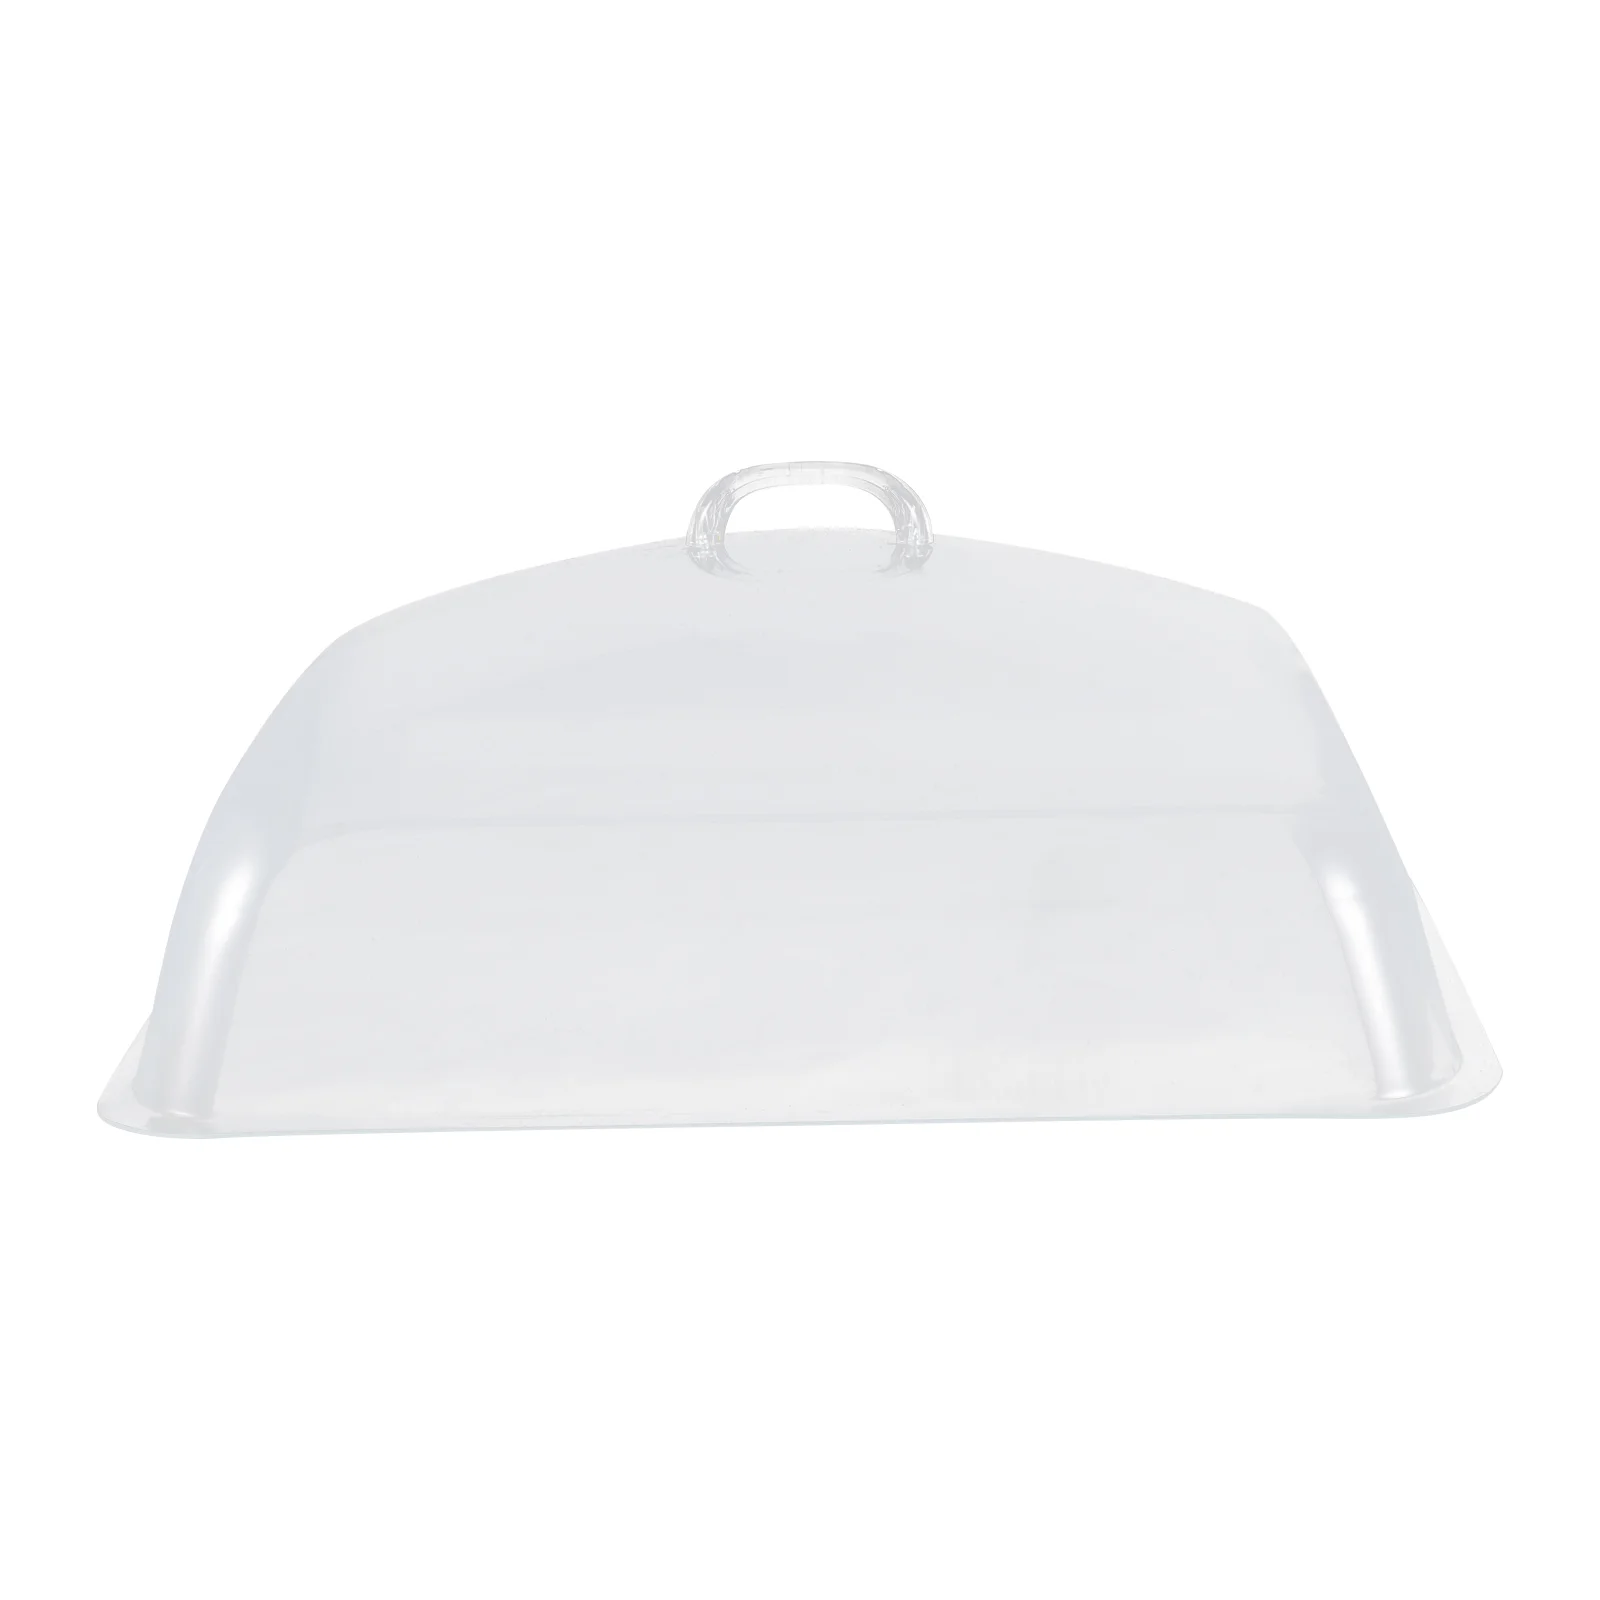 

Clear Plastic Cake Dome for Serving Desserts and Cakes at Home or in the Kitchen